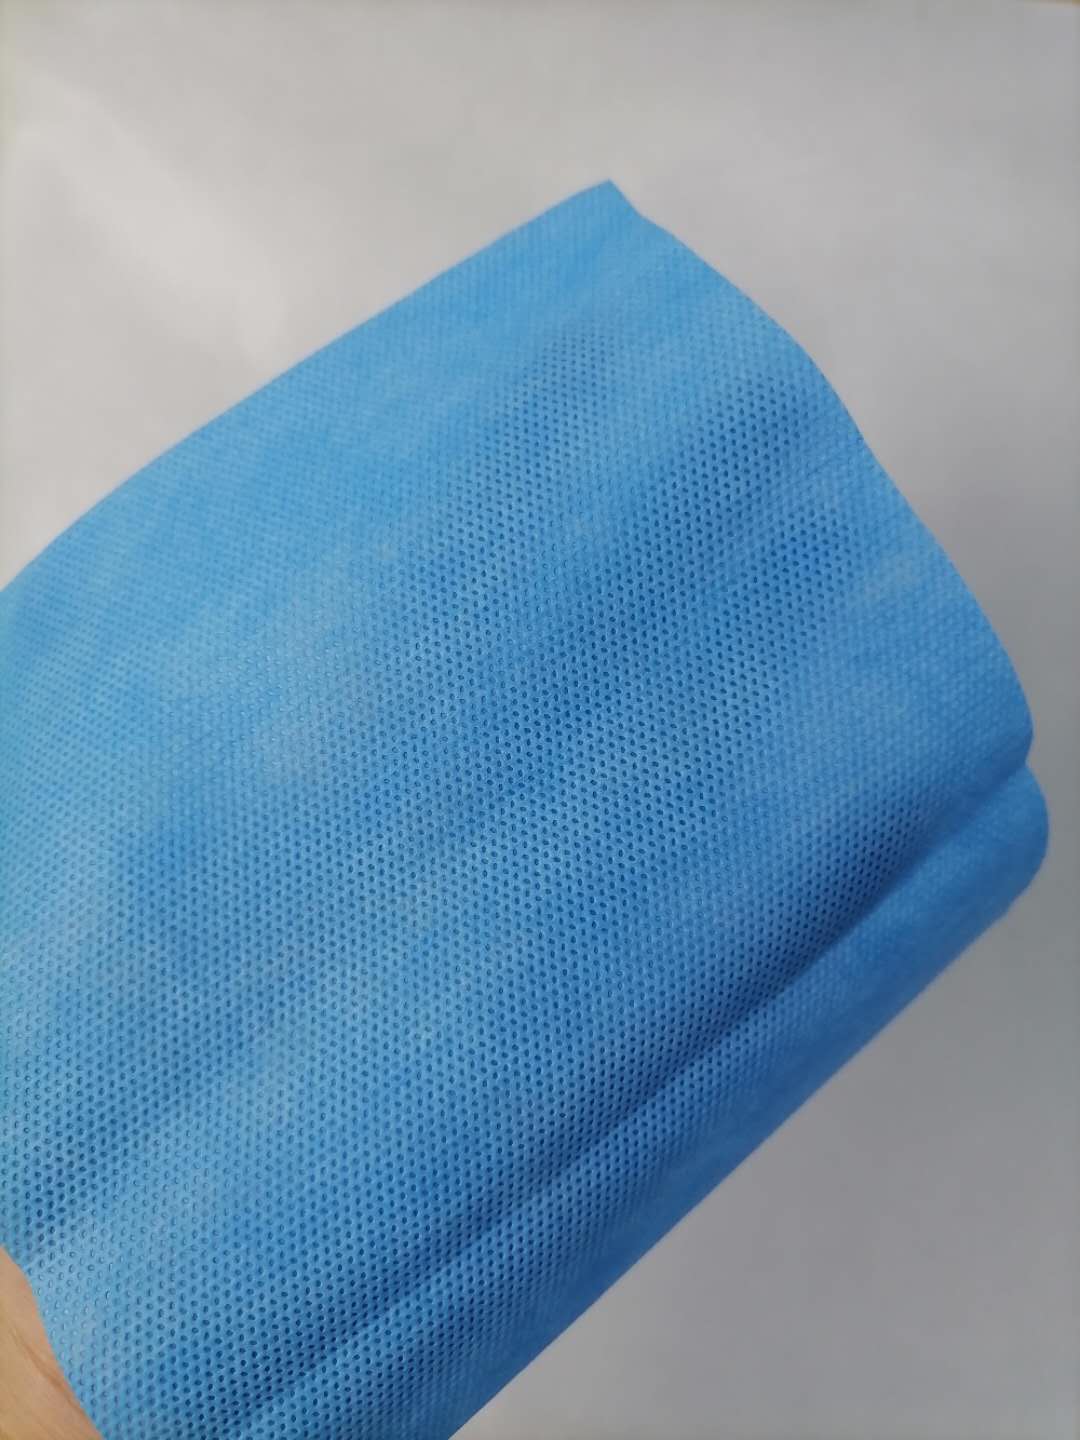 Waterproof S/SS/SMS Nonwoven Fabric Polypropylene Spunbonded Nonwoven Fabric Rolls 